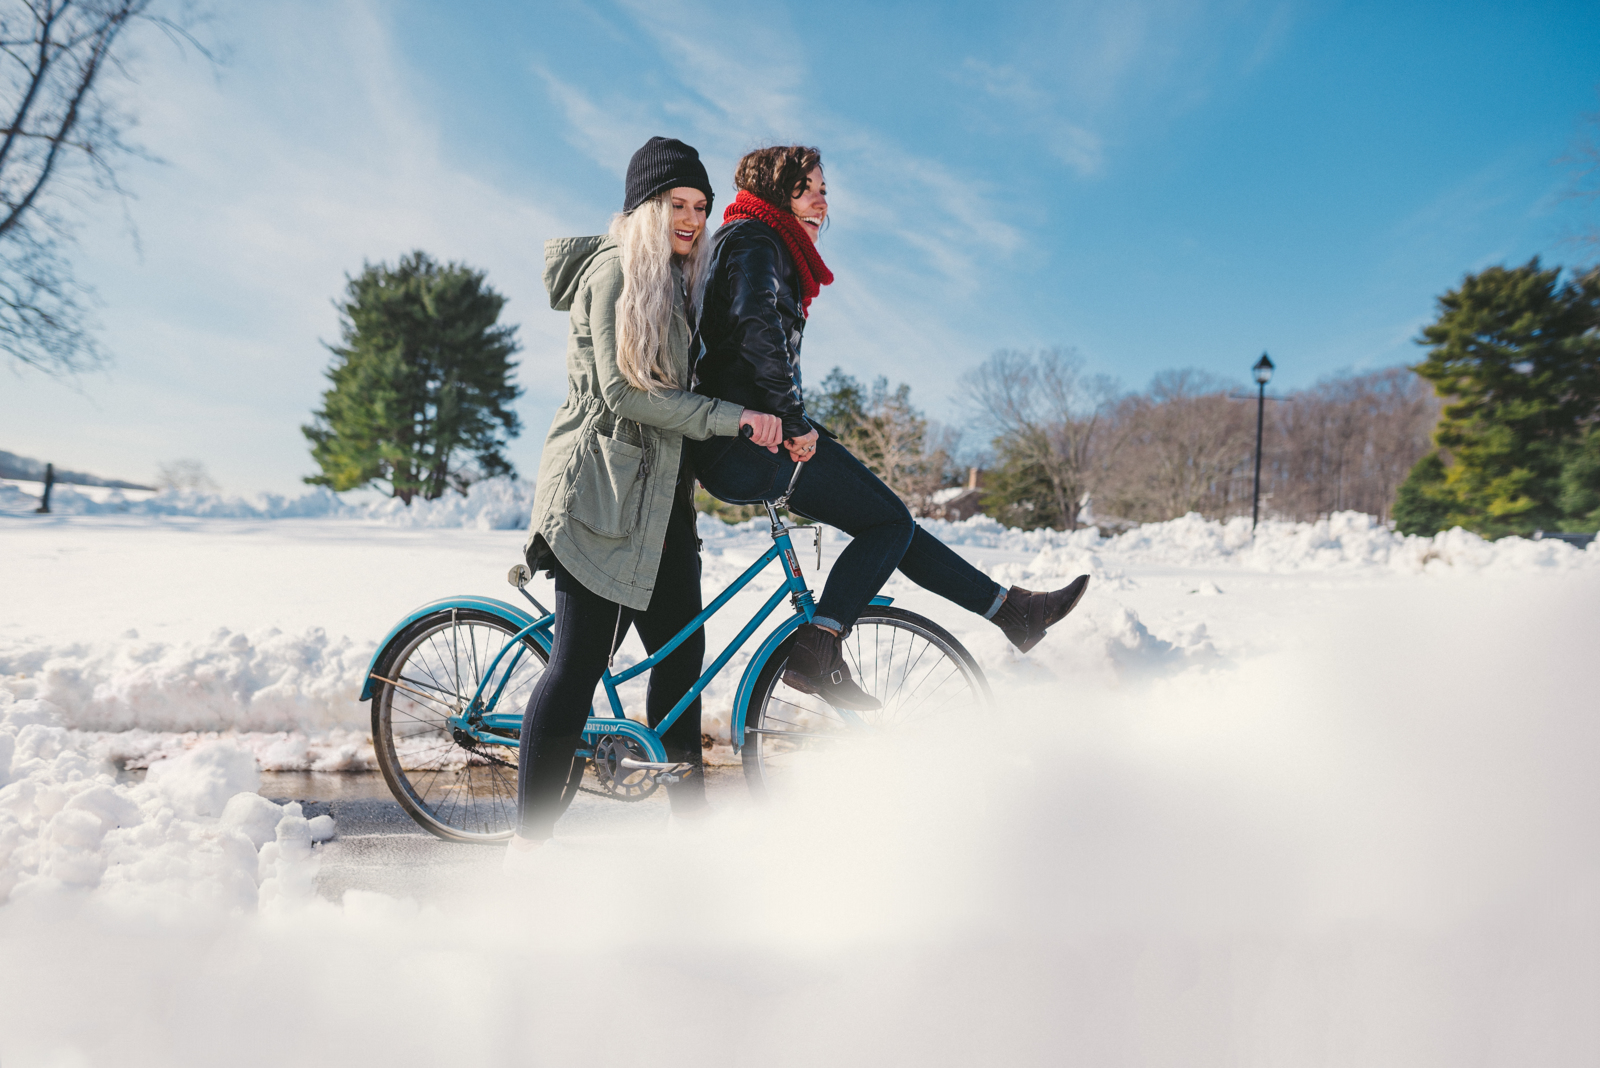 Video Marketing ideas for Winter Holidays Side profile of two women smiling wearing winter gear on a bicycle with one sitting on the handlebars going through the snow